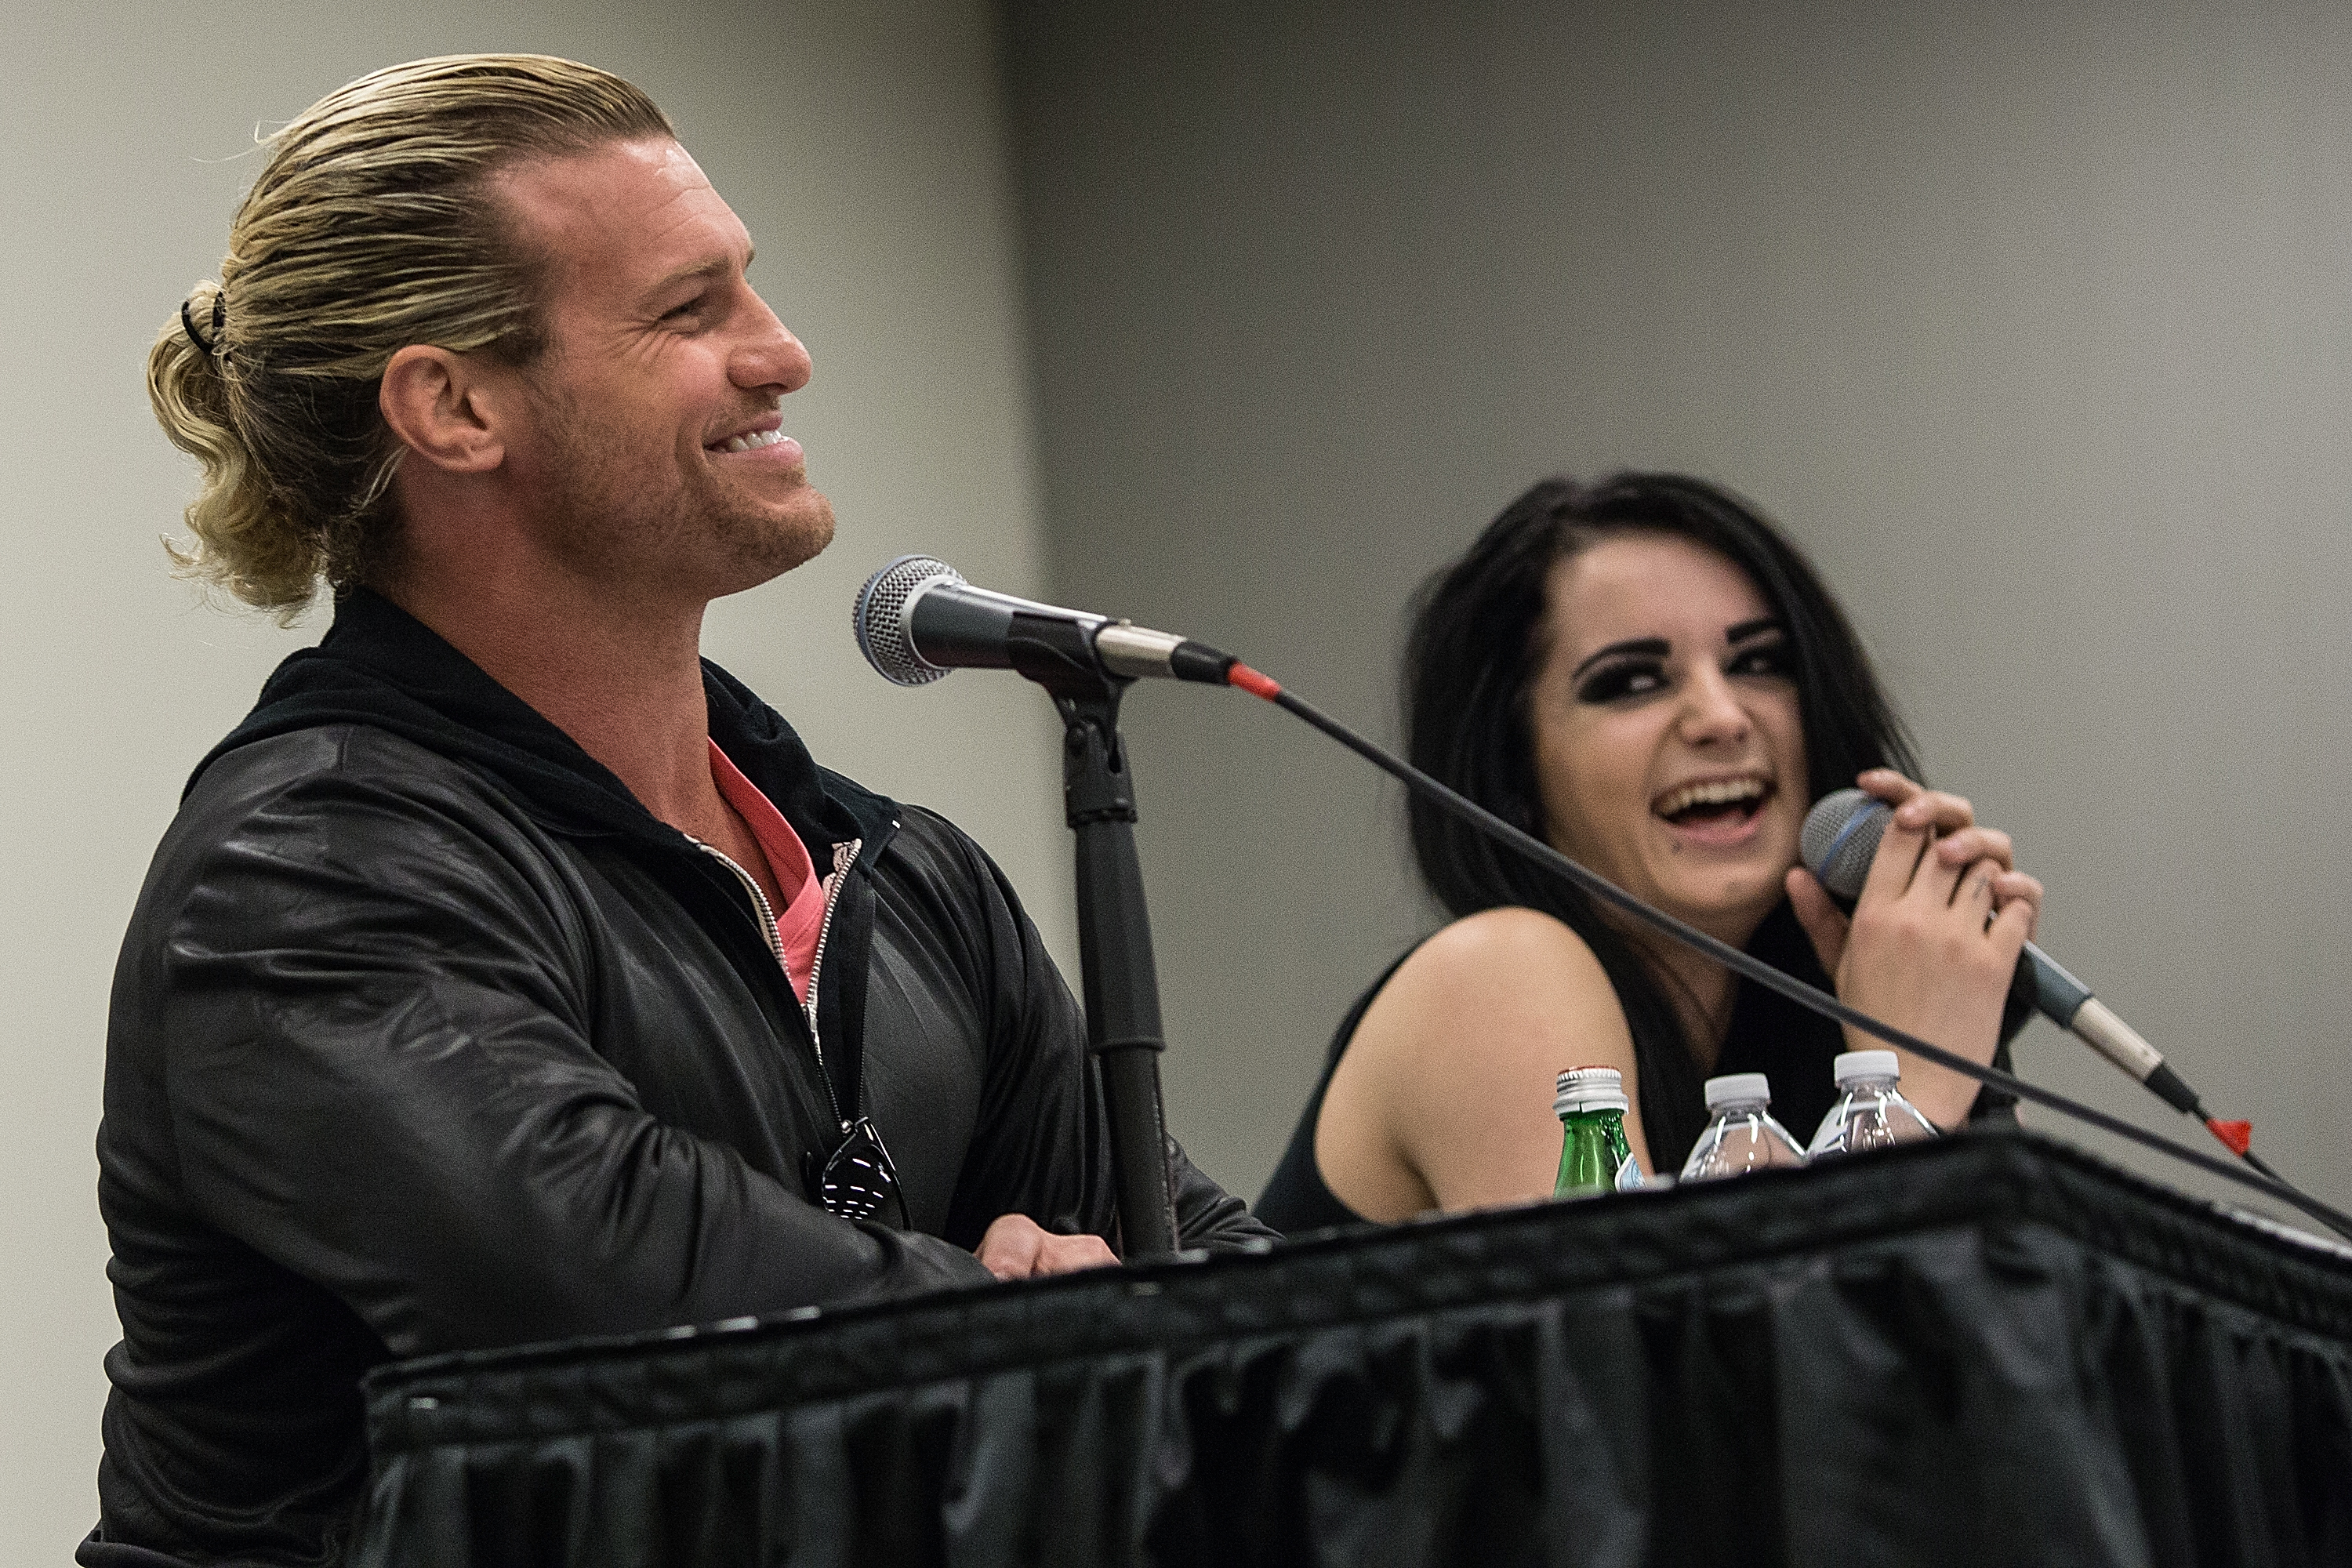 Paige and Dolph Ziggler